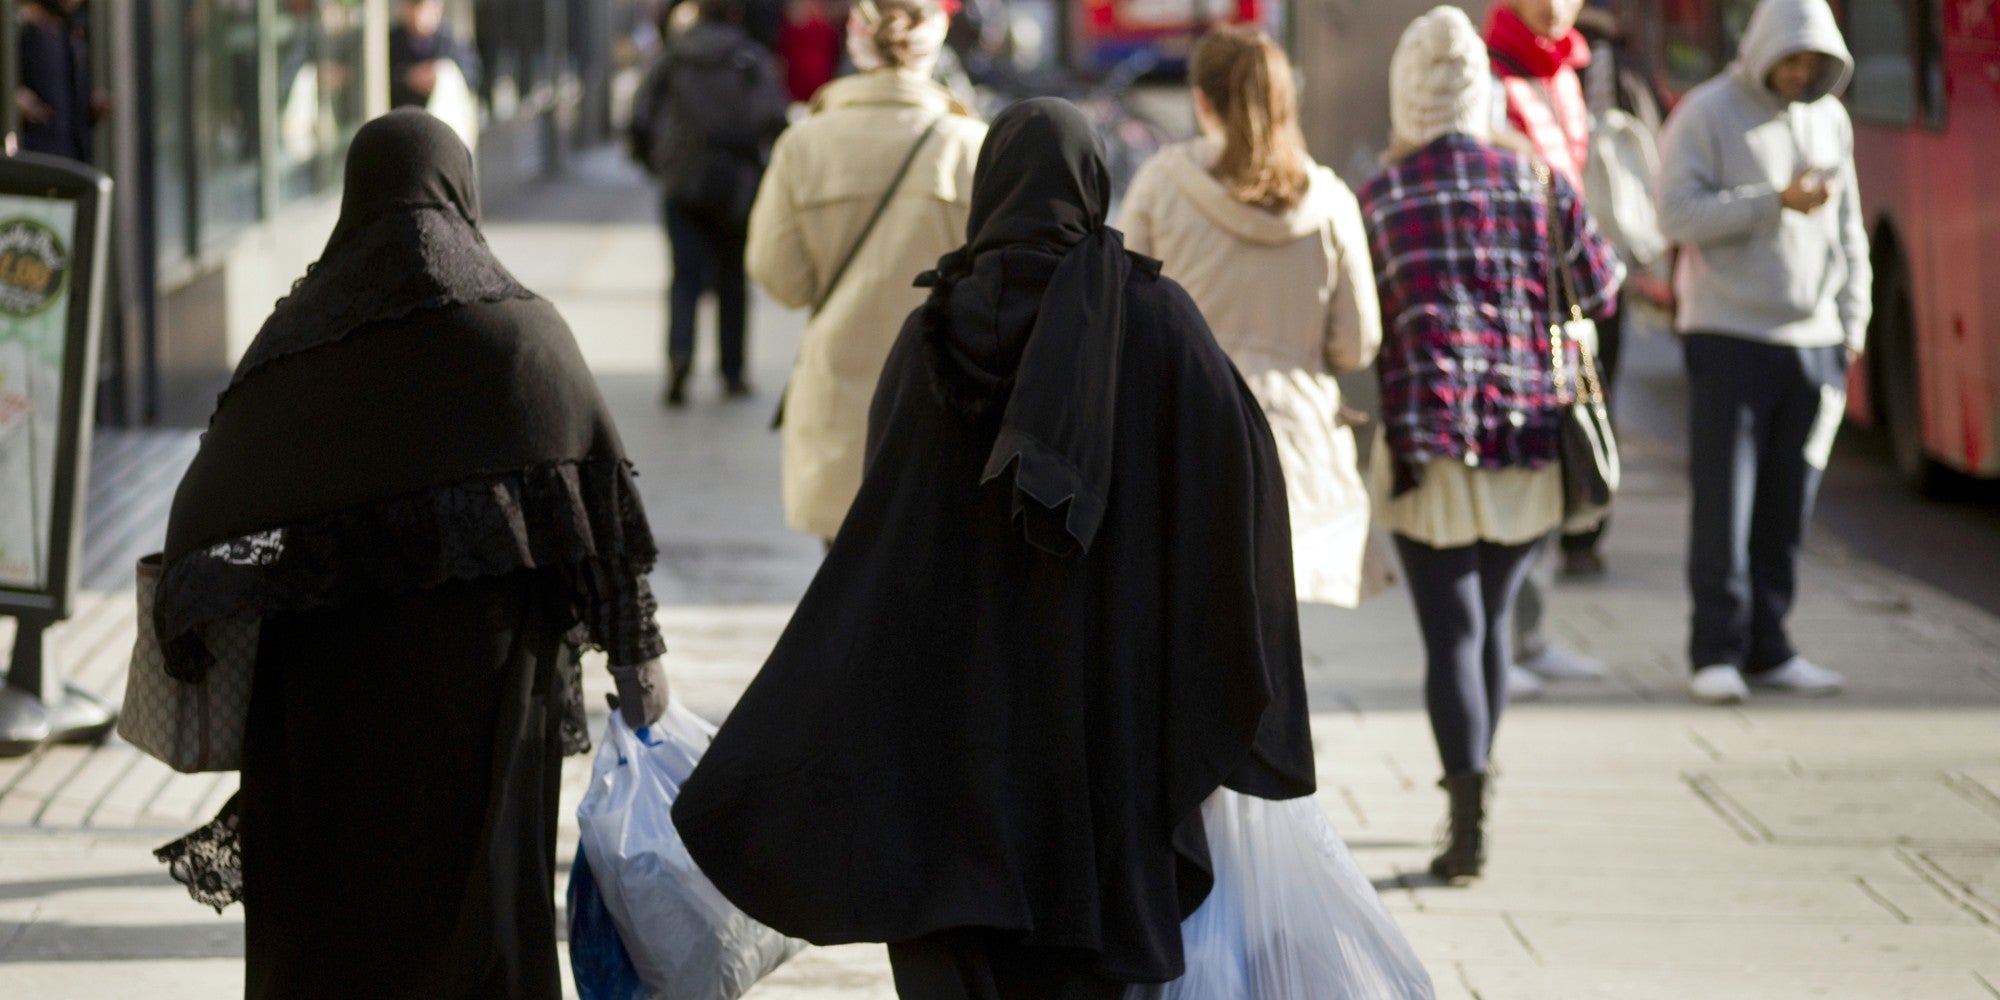 Two people wearing burqas walk with their backs facing the camera.